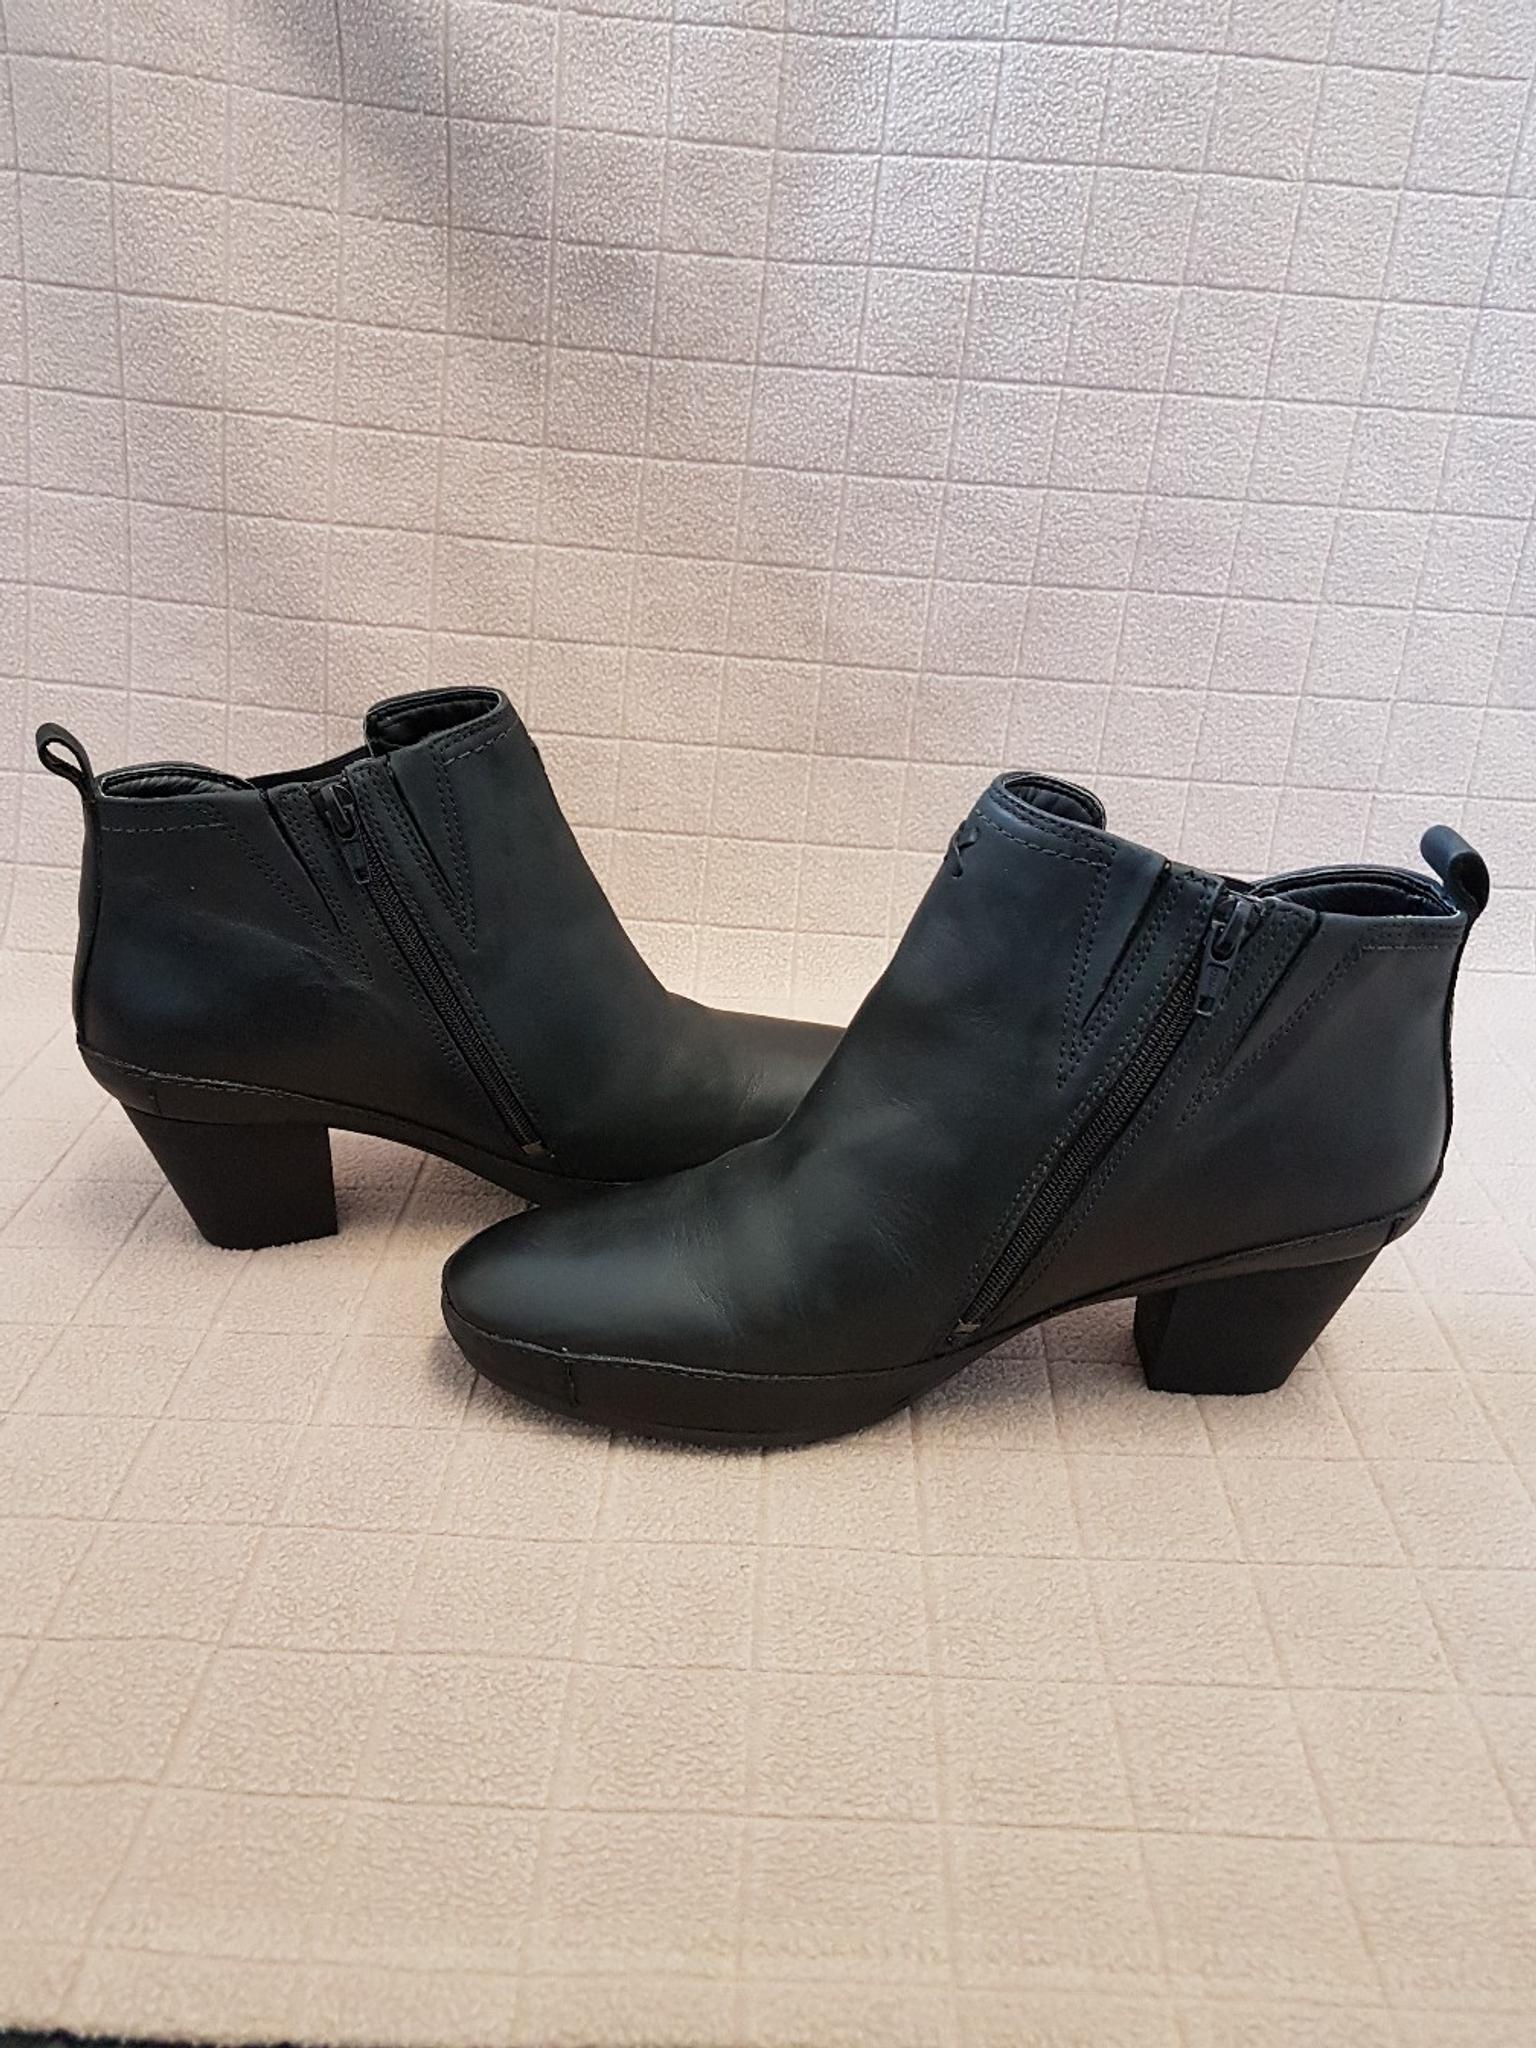 clarks wide fit black ankle boots